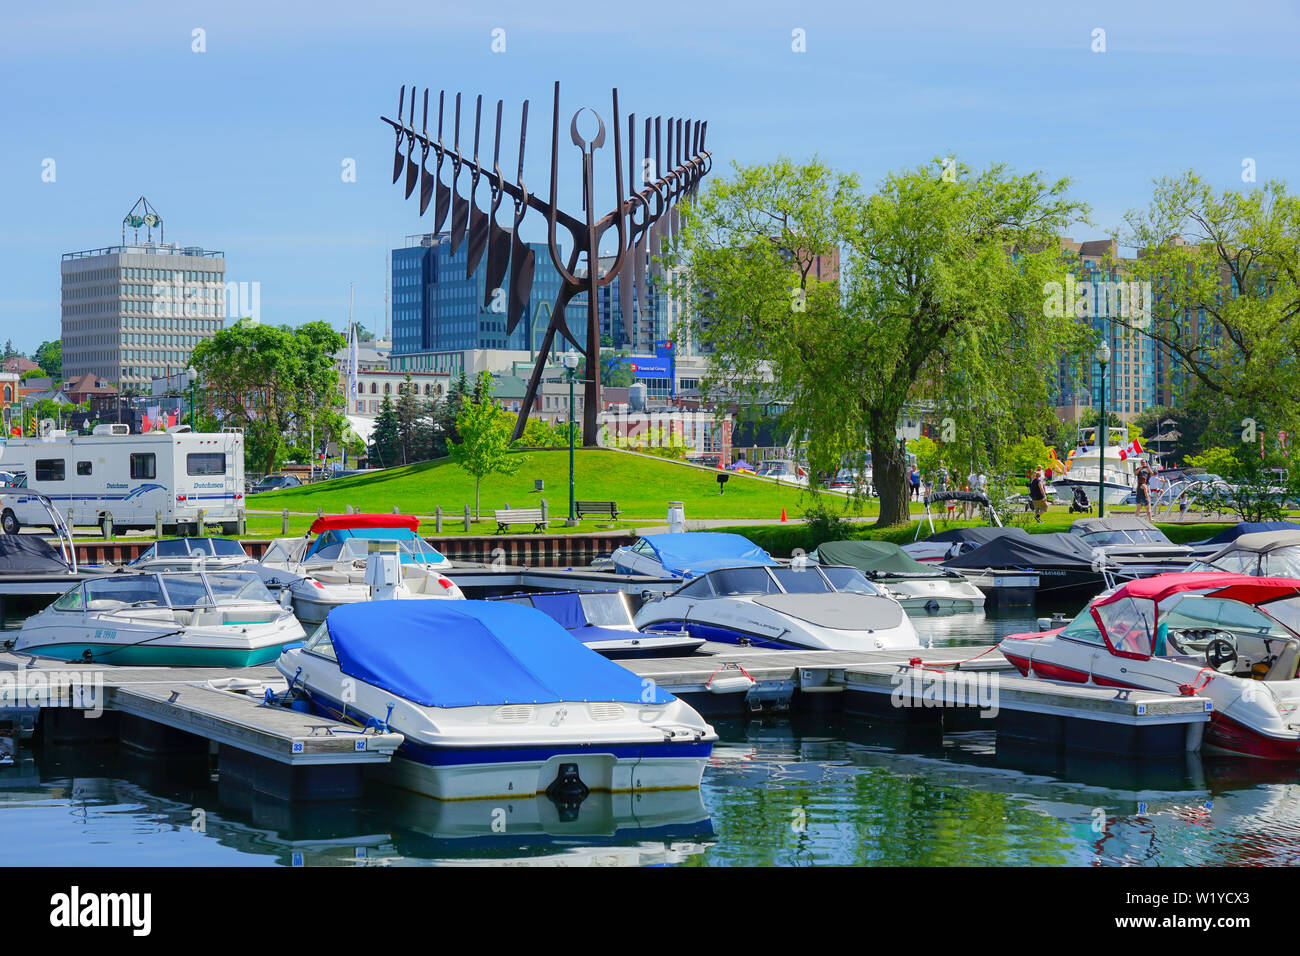 Barrie, Ontario, Canada, City in Northern Ontario, Lake Simcoe, Kempenfelt Bay, with lots of Boats and Condos on the lake. Stock Photo